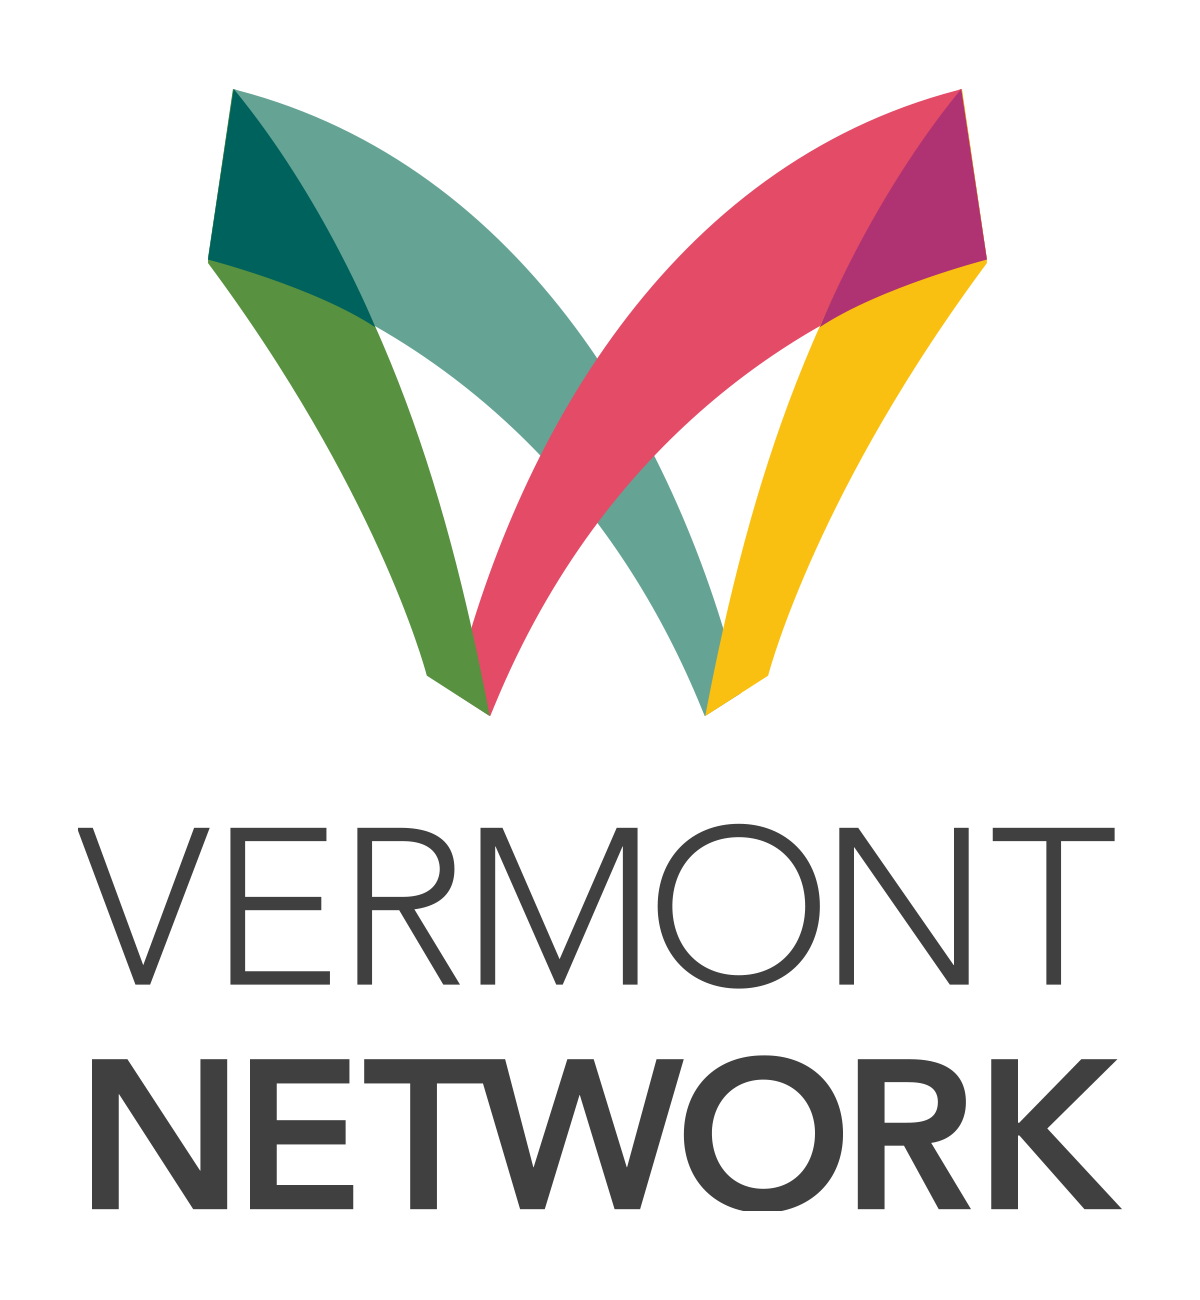 The Vermont Network